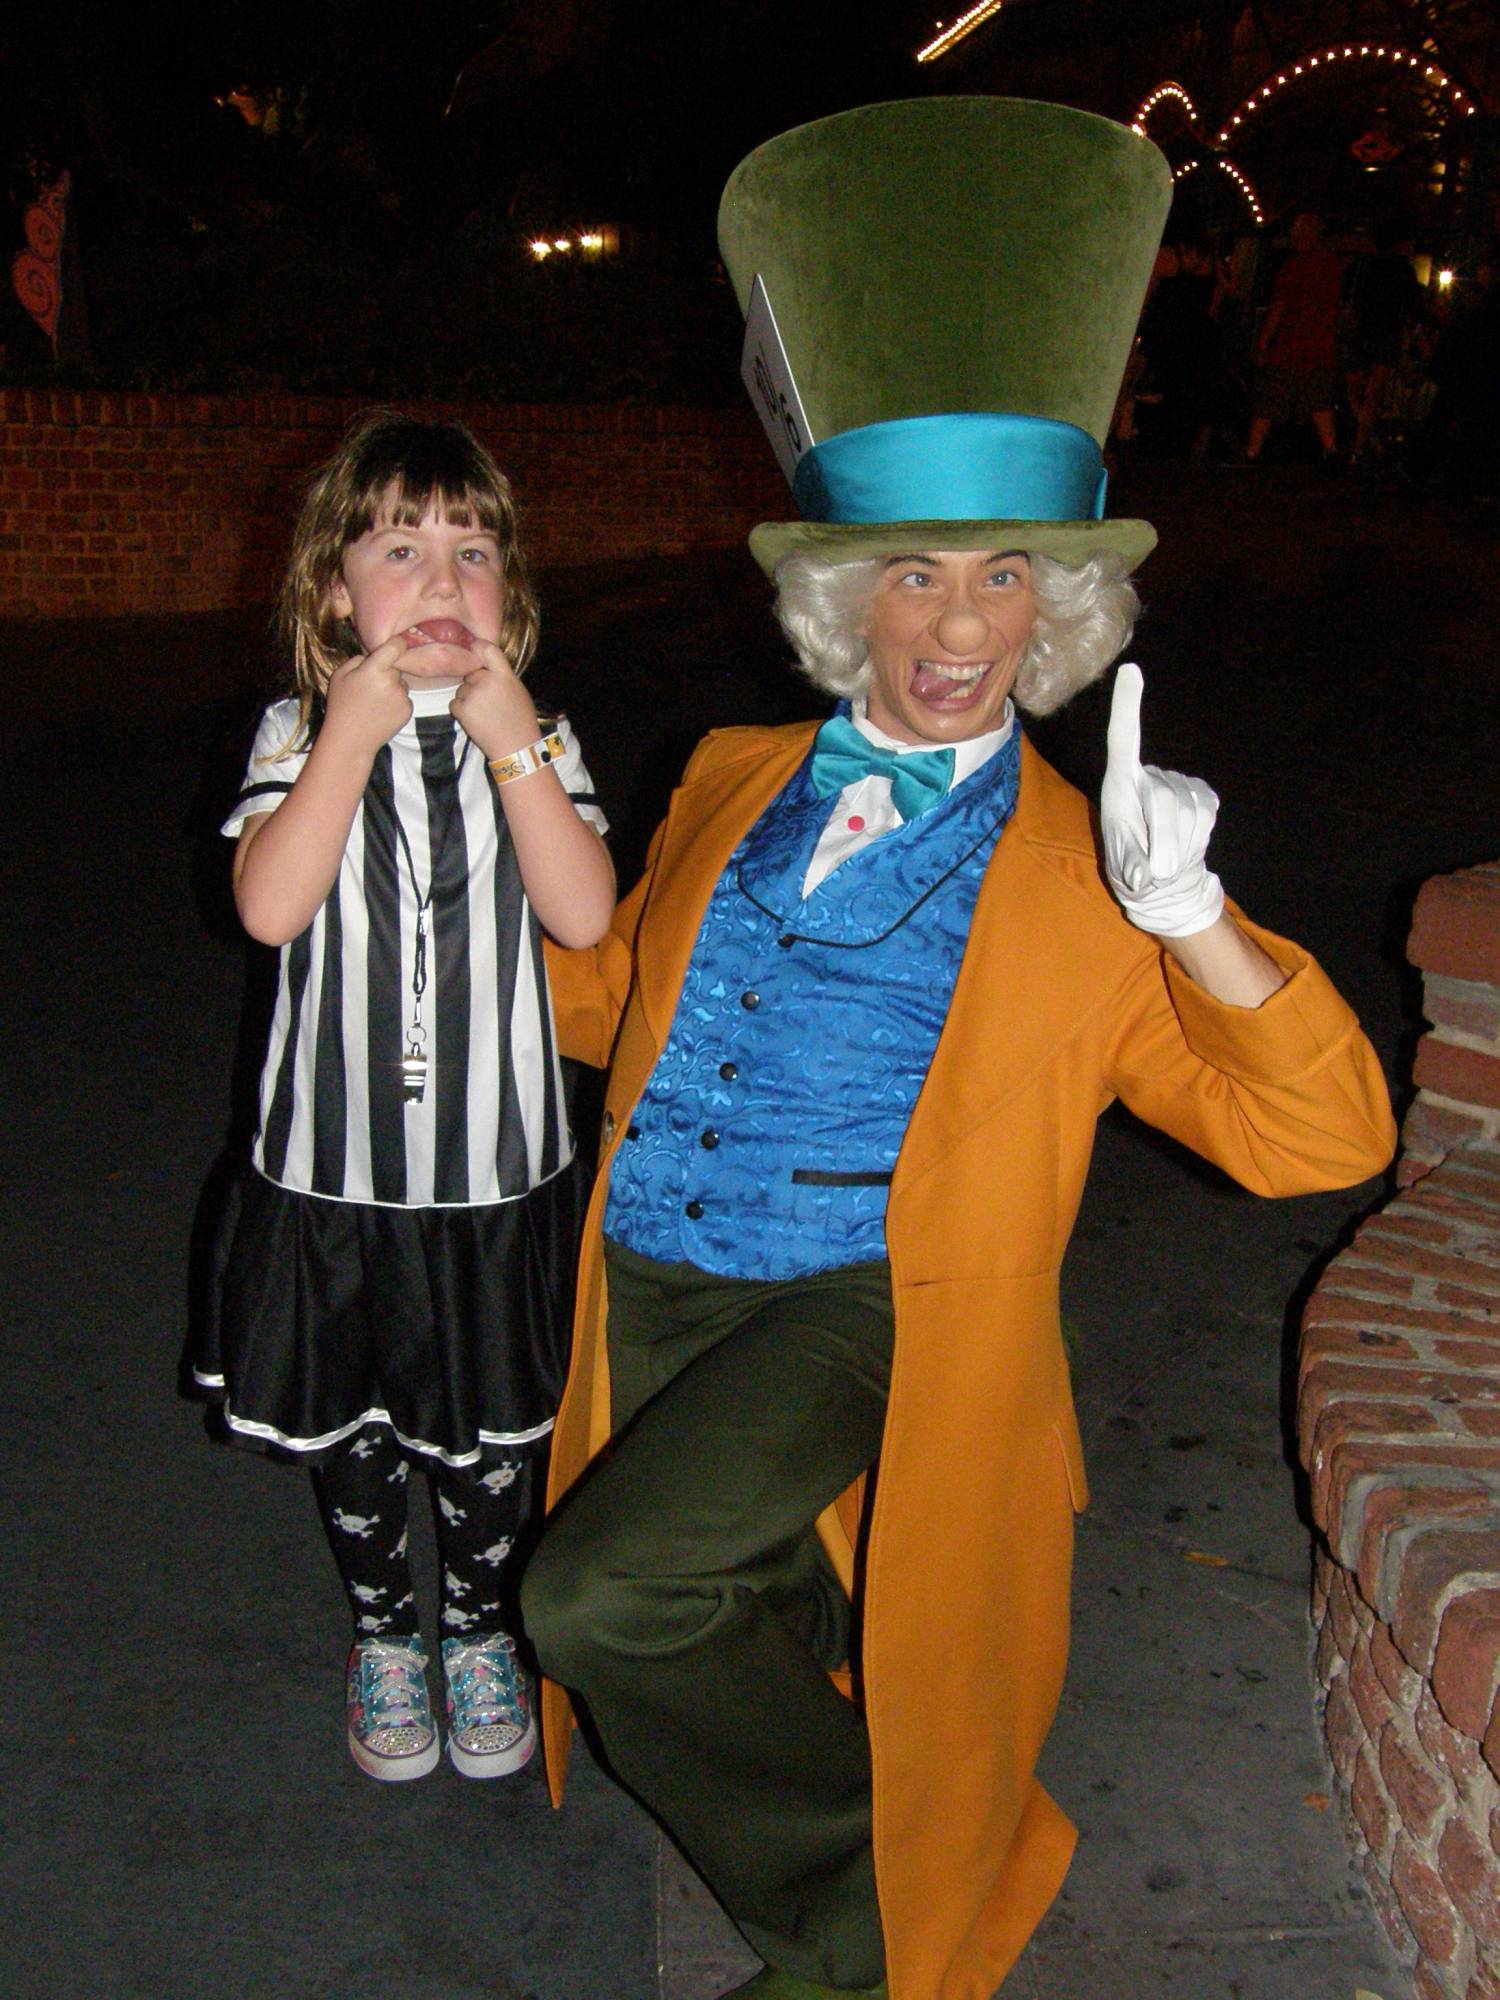 Silly Mad Hatter